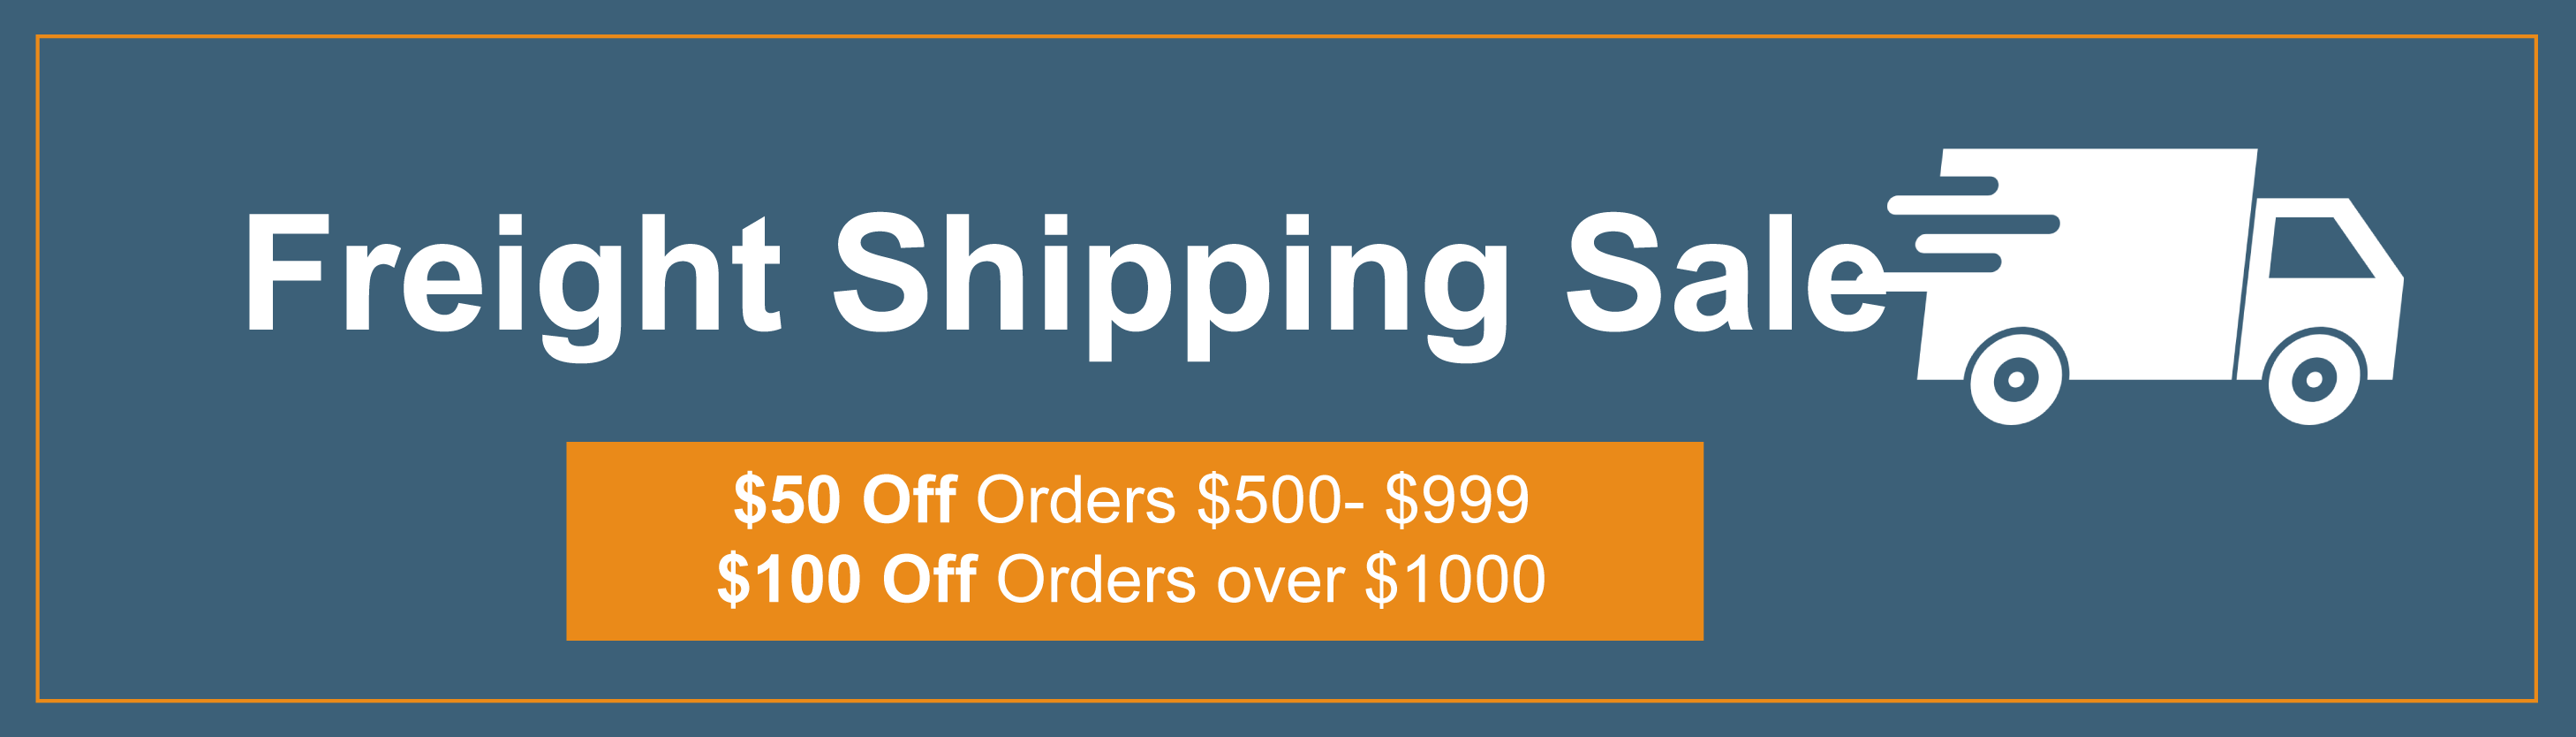 Freight Shipping Sale $50 off orders $500 - $999. $100 off orders over $1000